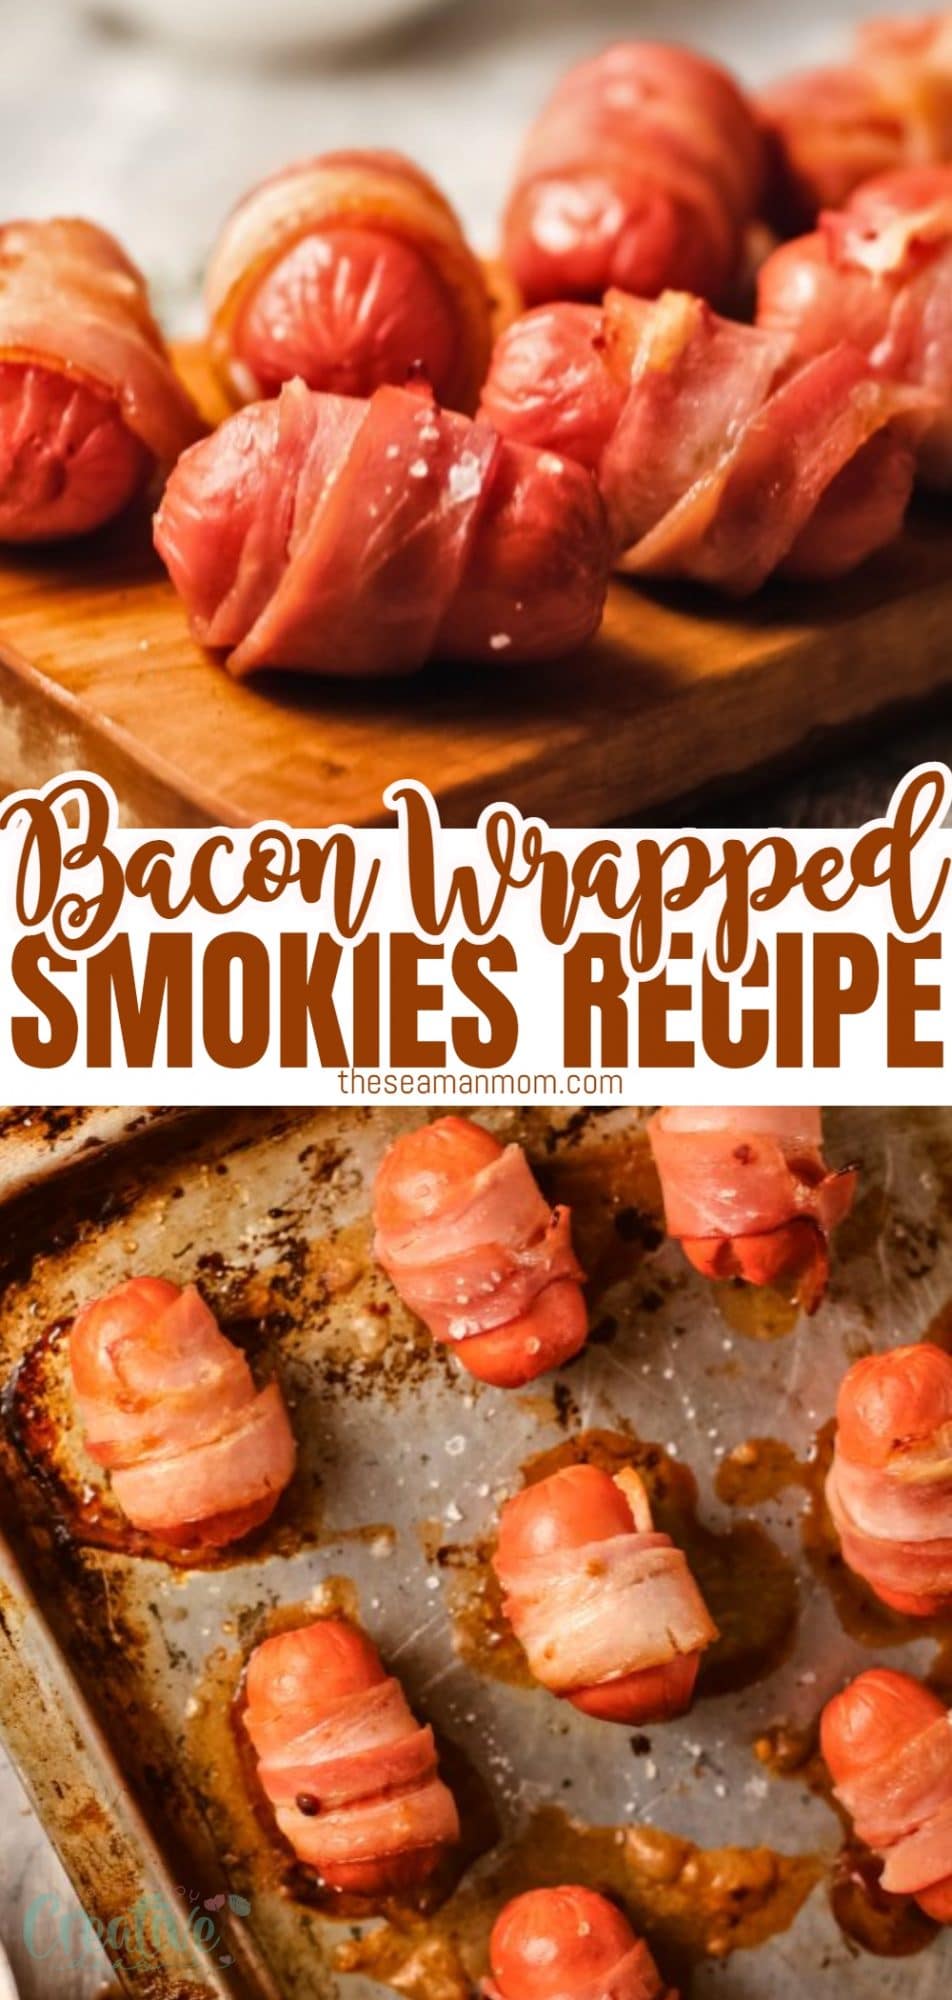 Spicy bacon wrapped smokies